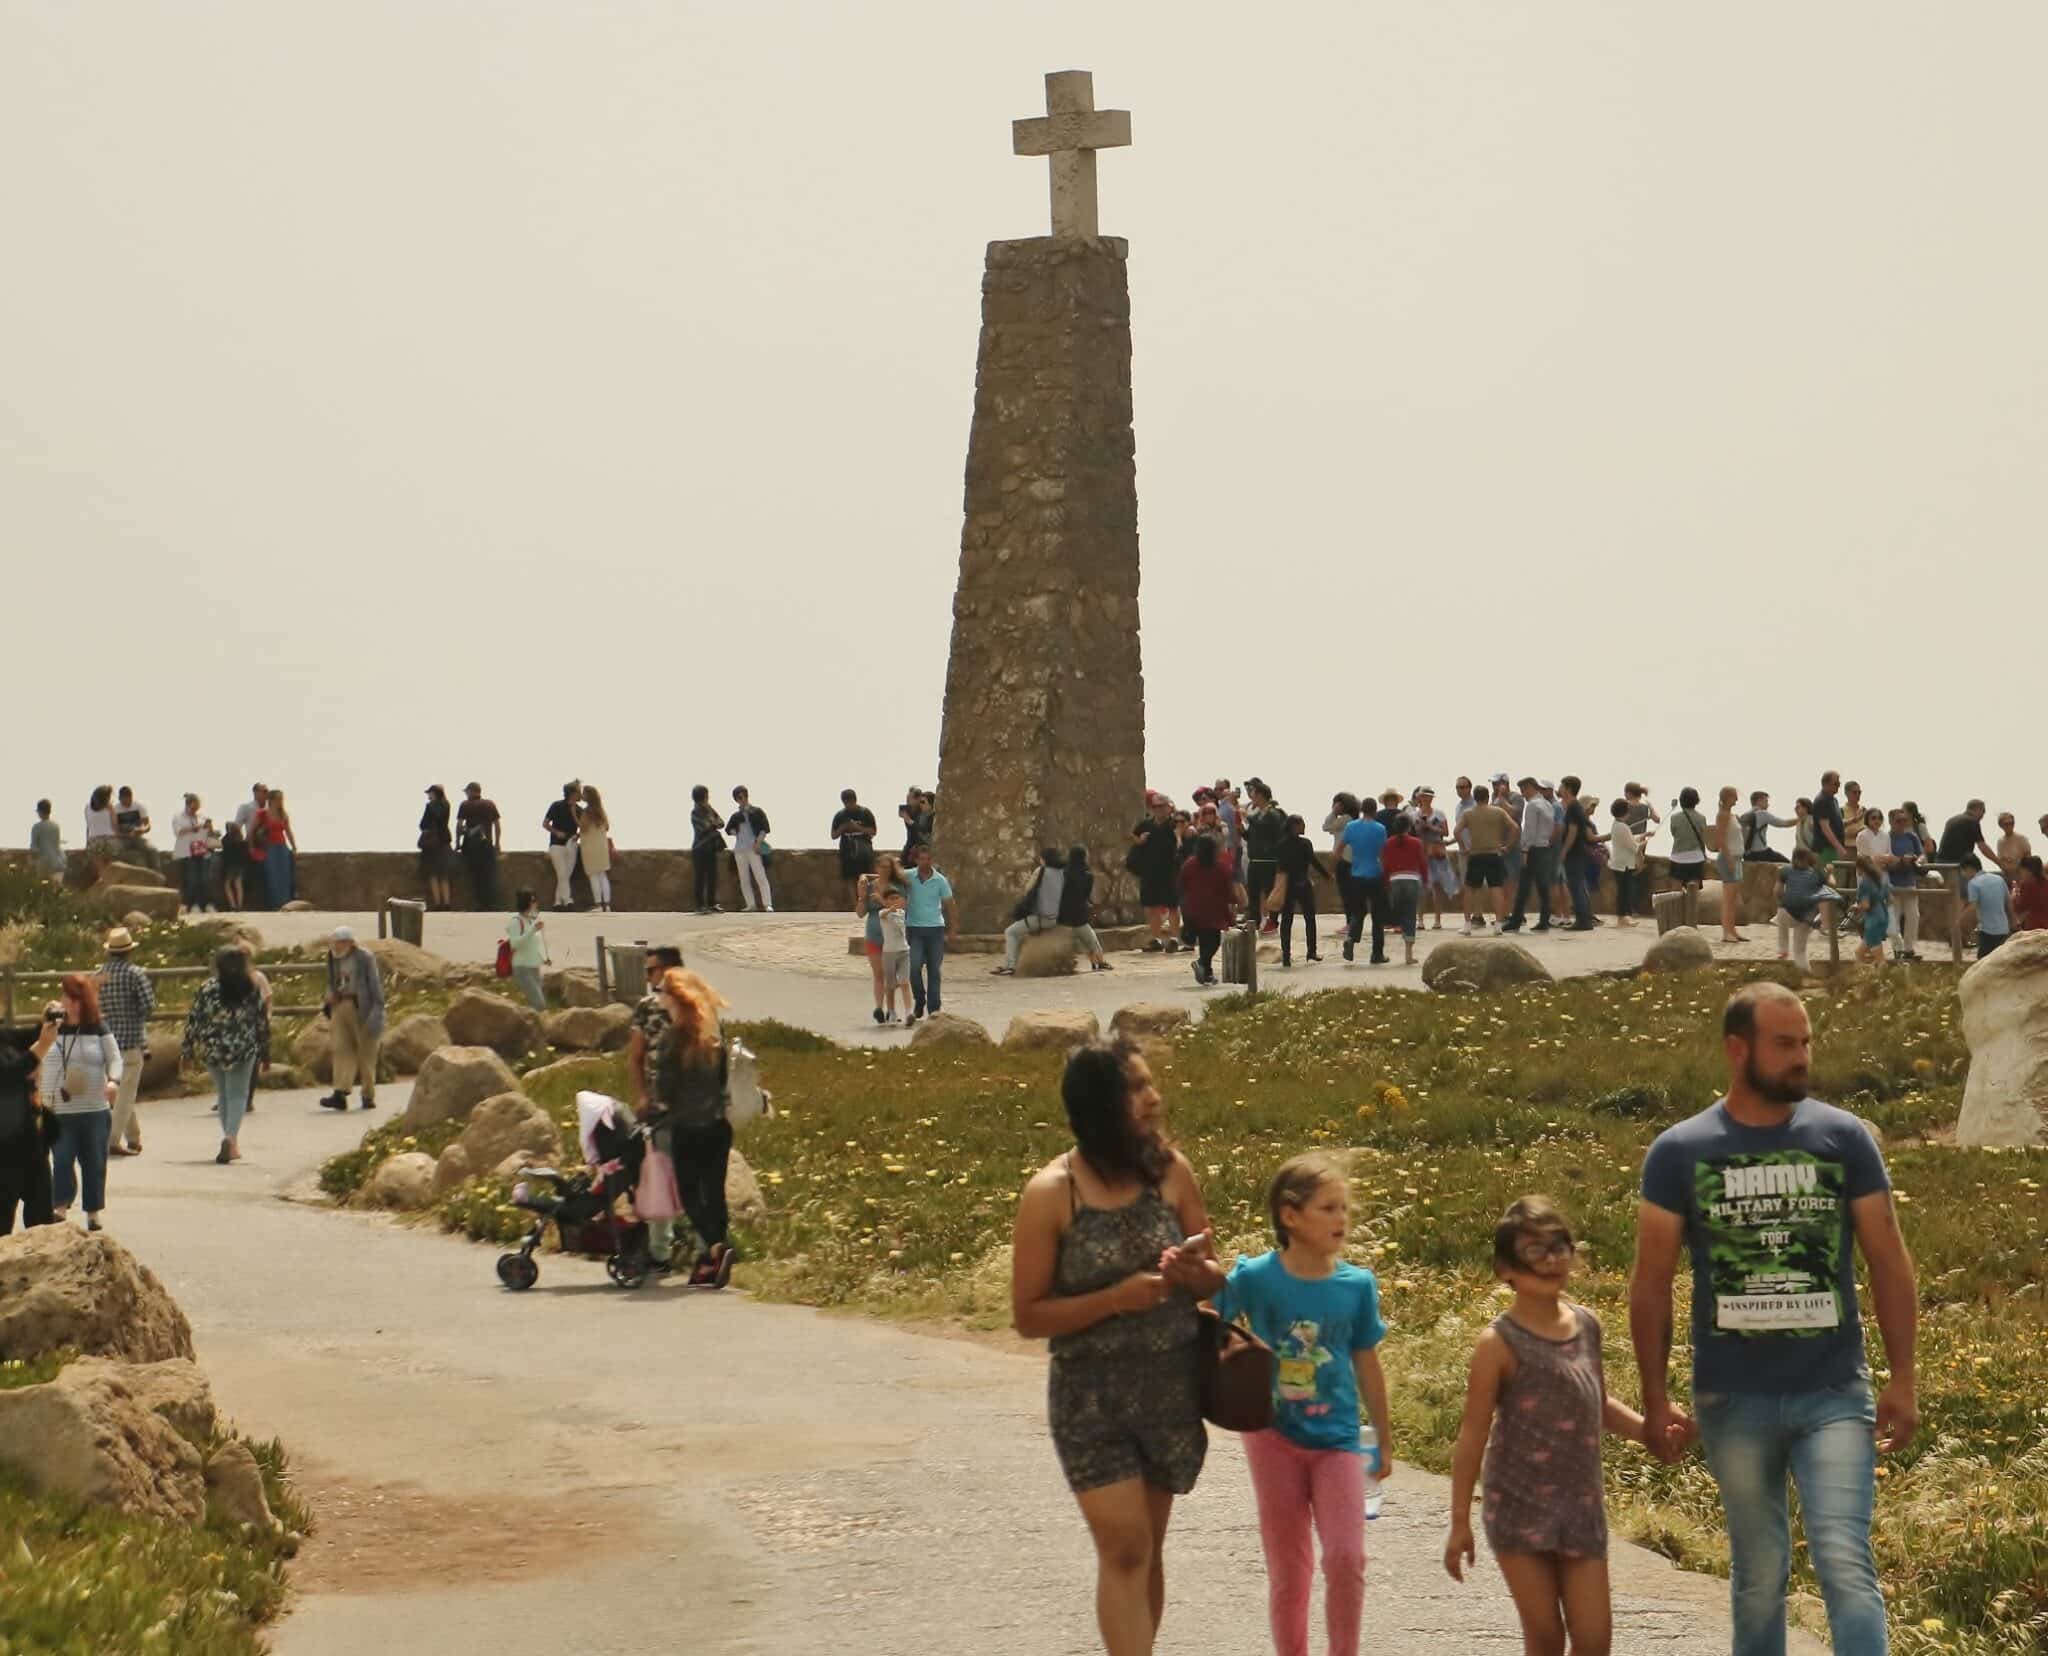 Cross at Cabo da Roca marking the westernmost point of continental Europe